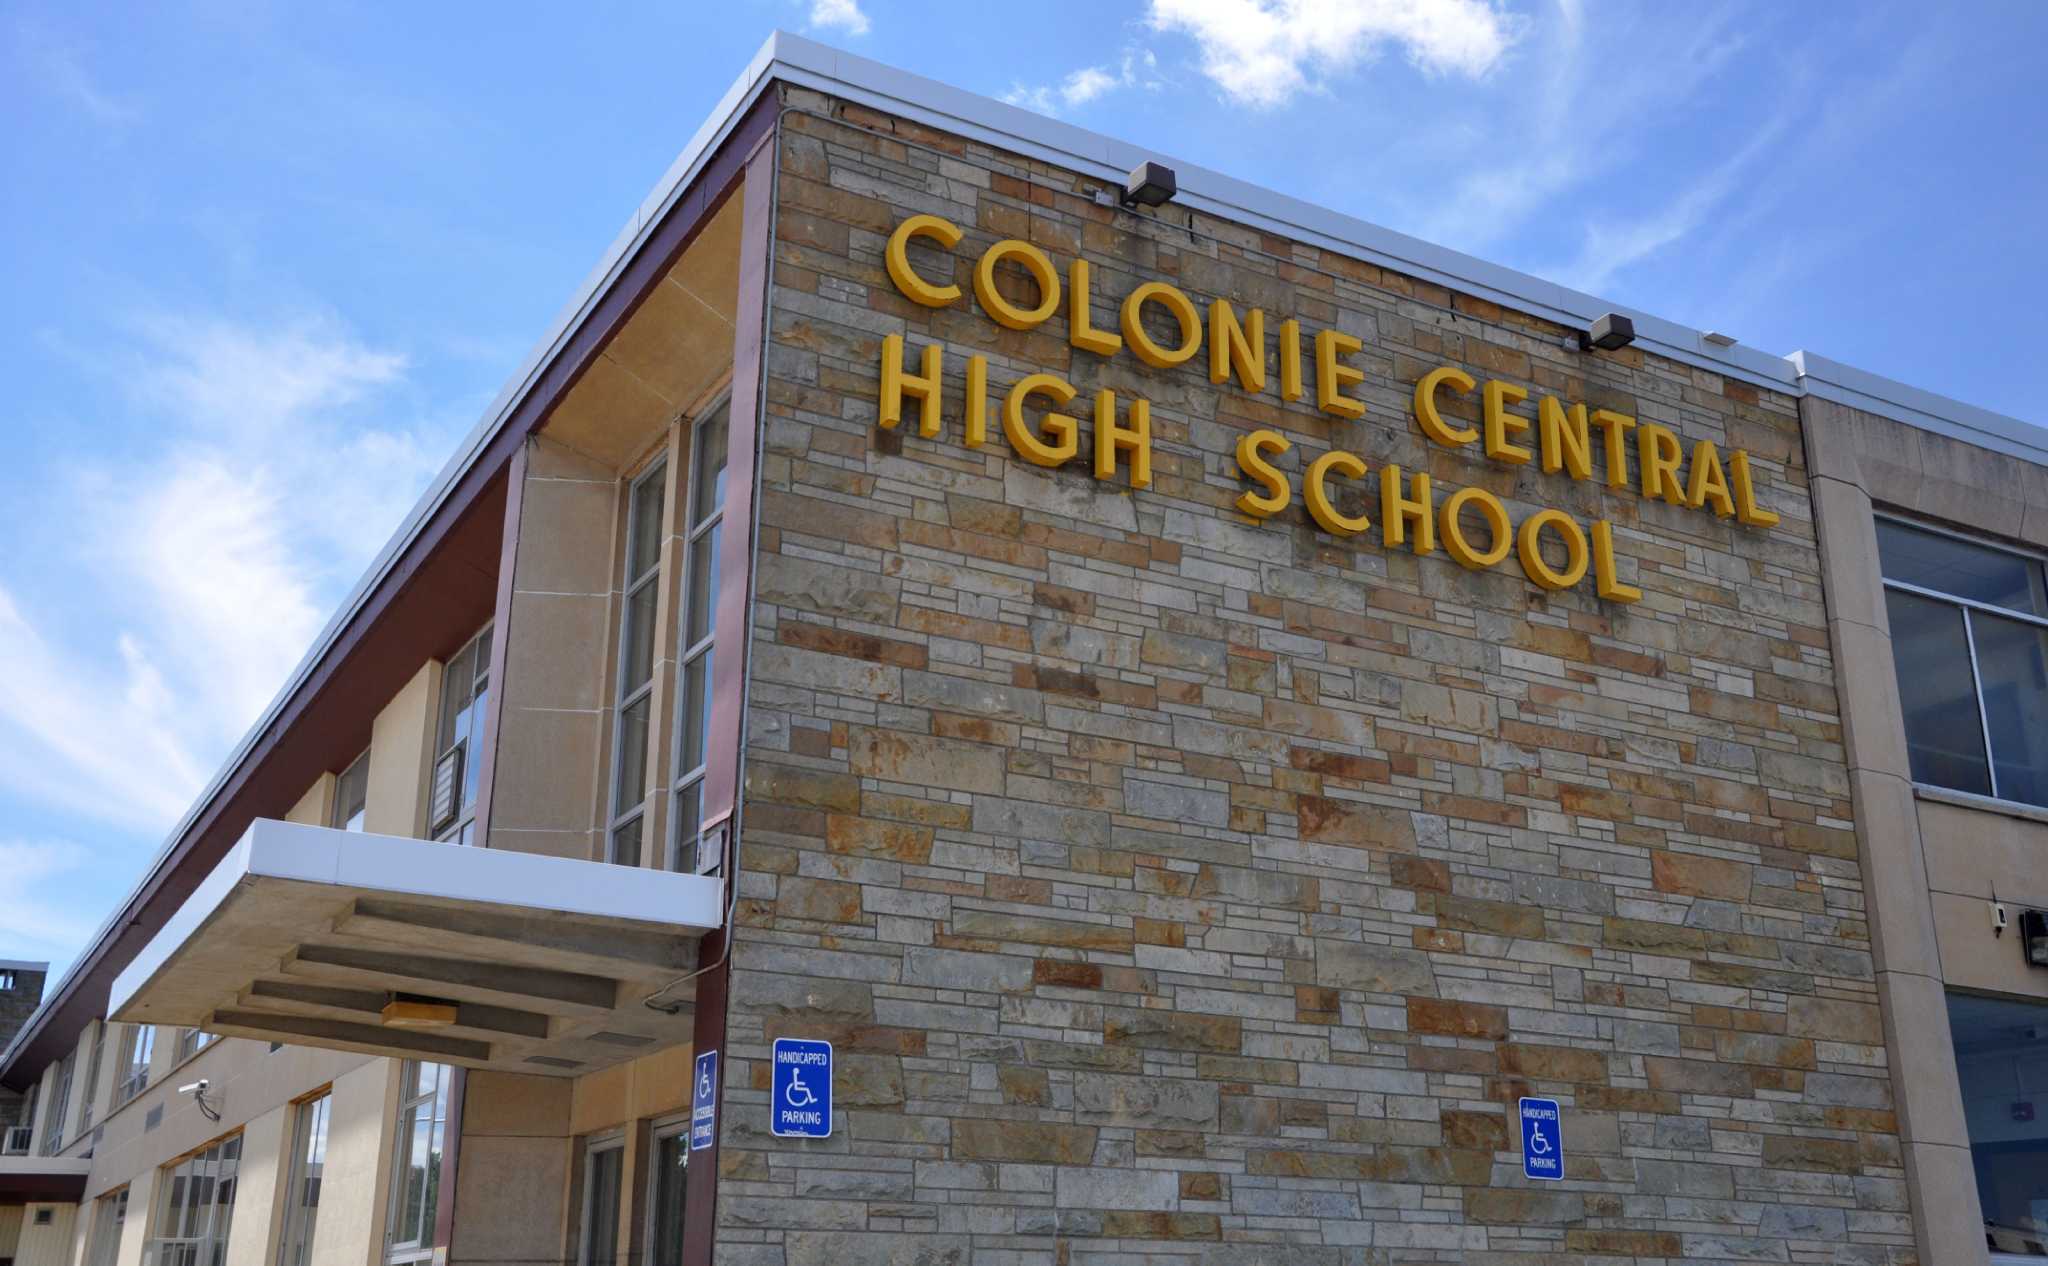 Extra police at Colonie high school following school bus comment